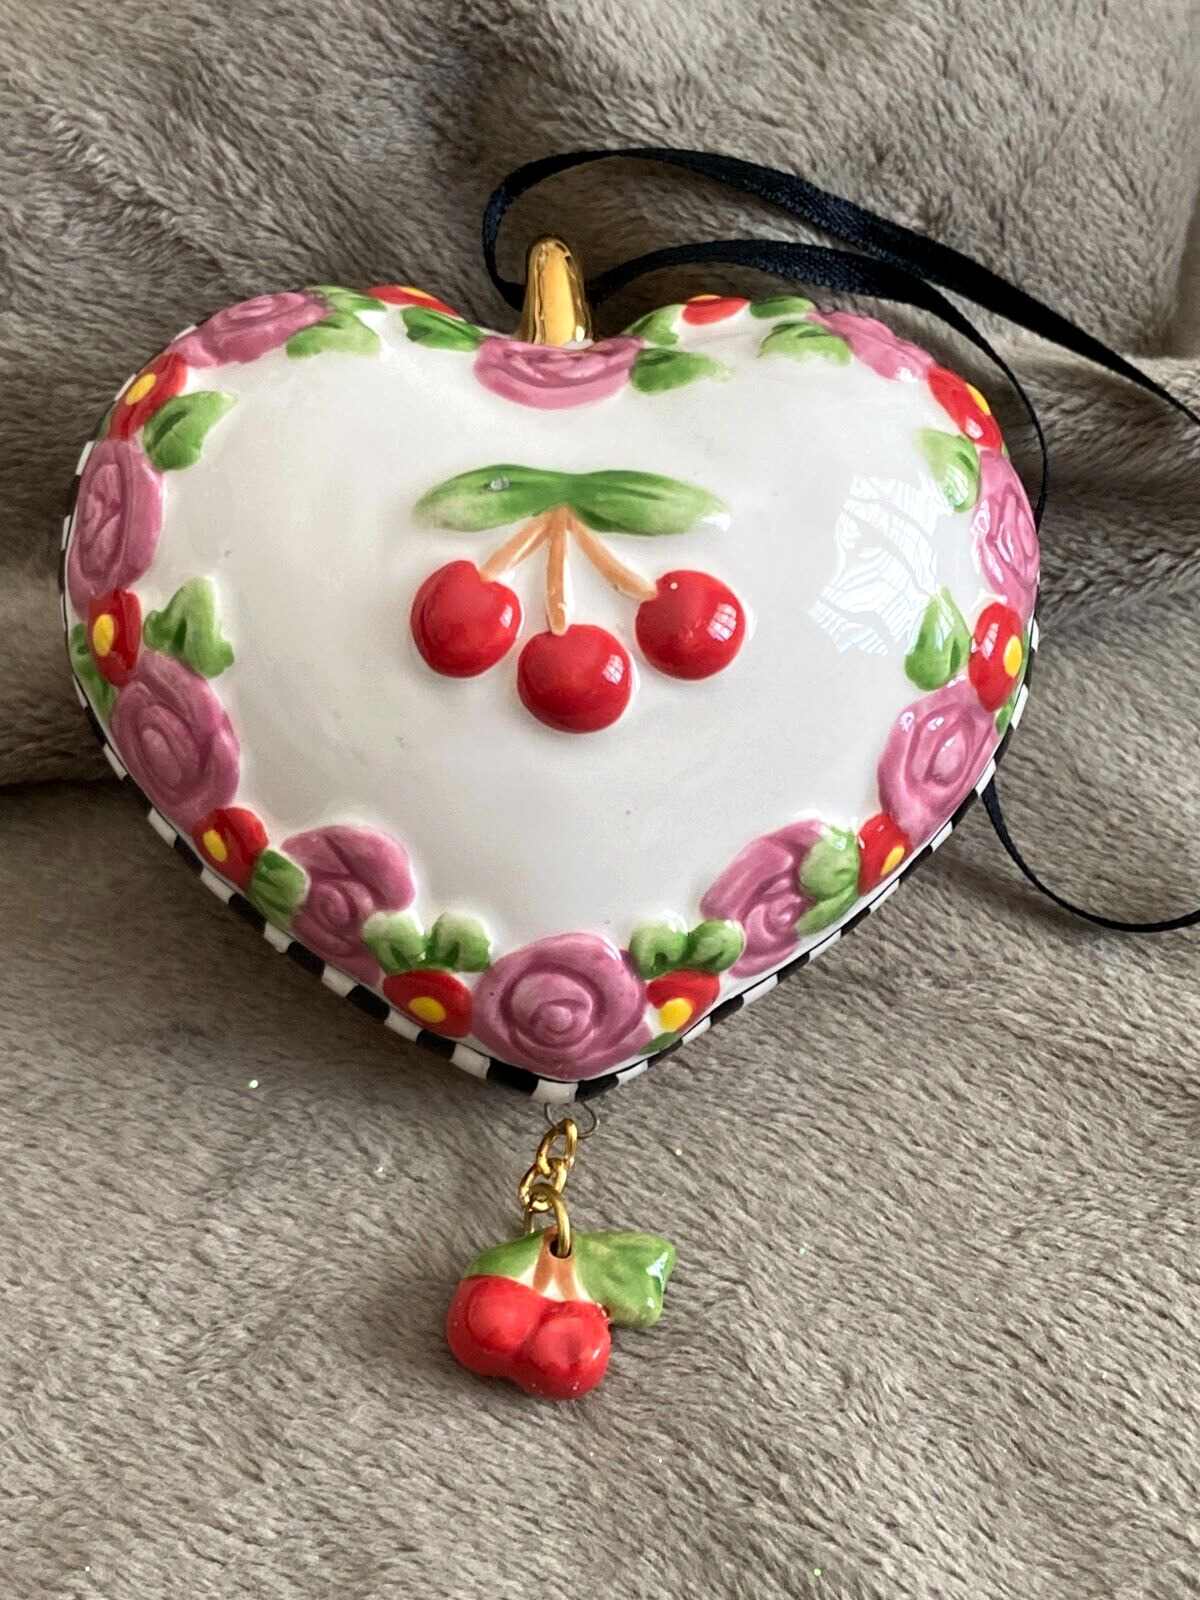 Mary Engelbreit ~ Porcelain Puffed Heart with Flowers & Cherries Ornament